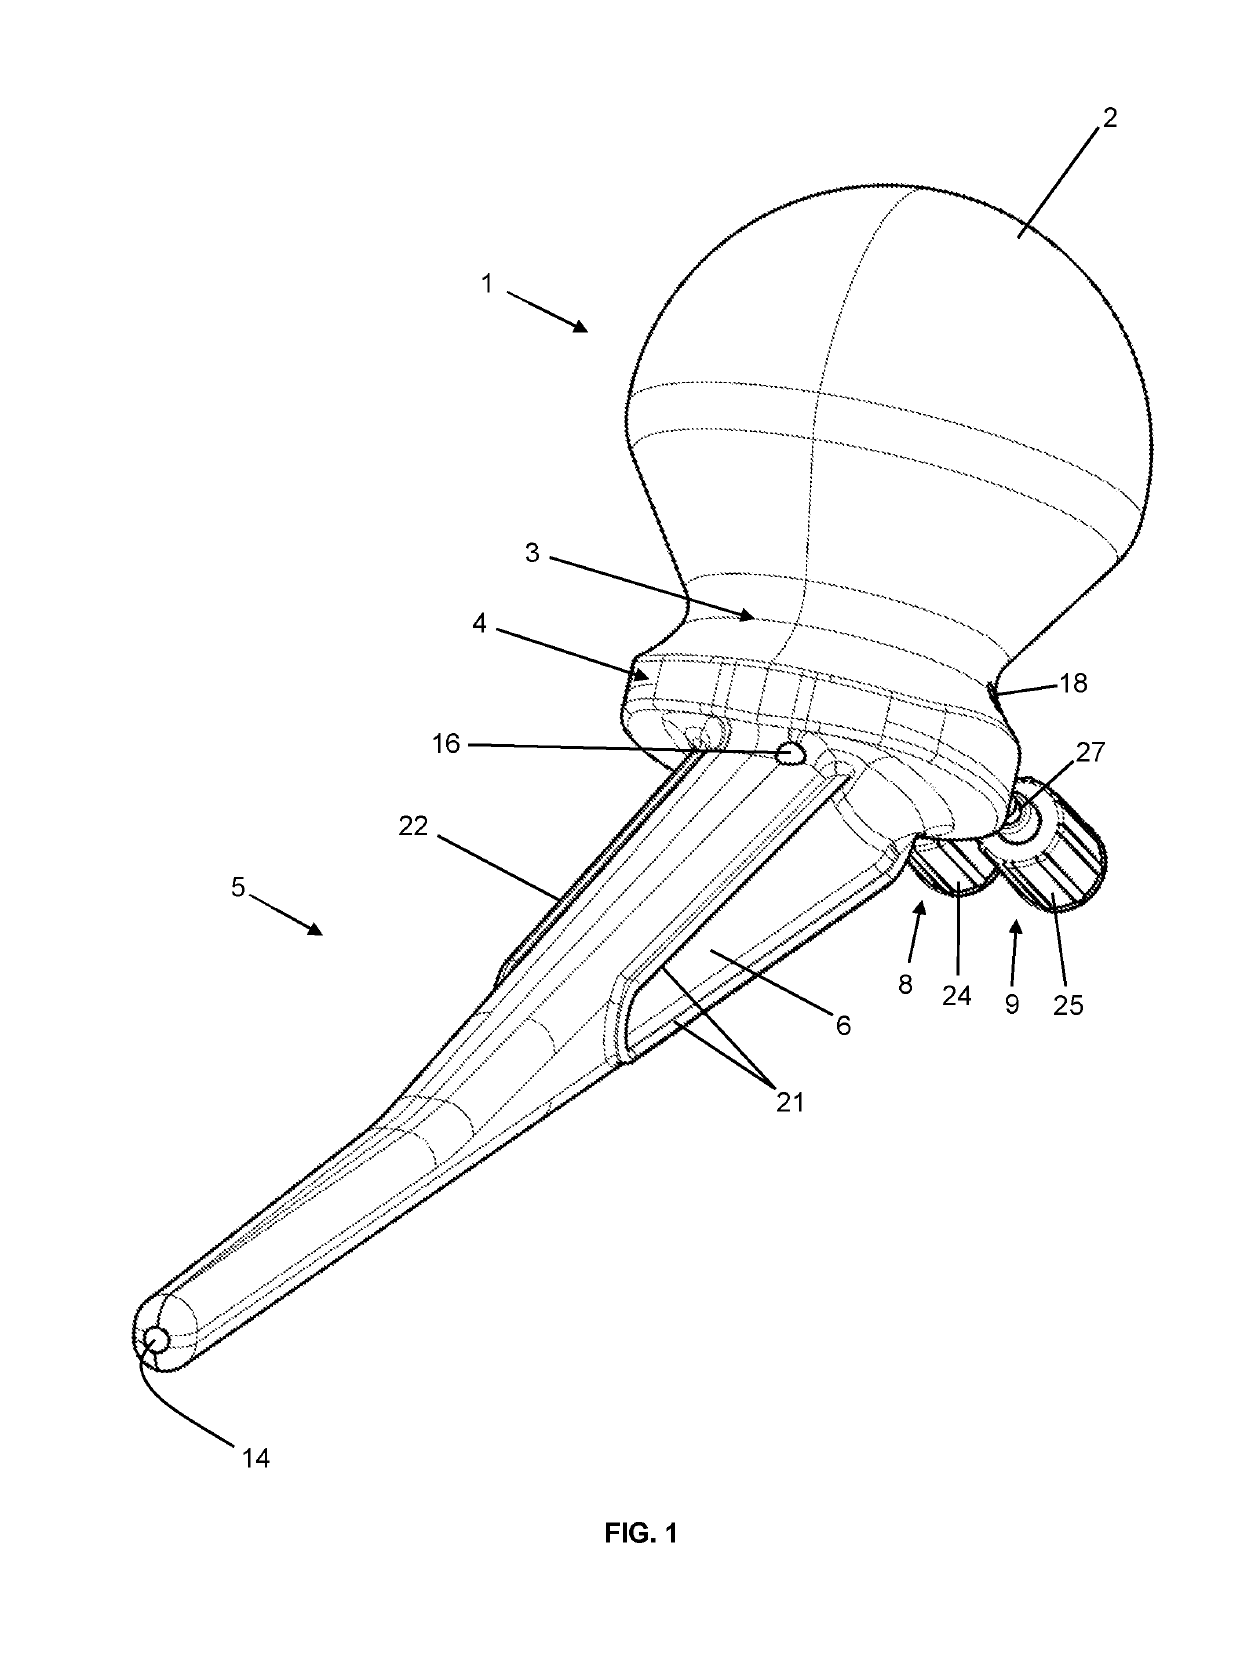 Femoral hip joint spacer with irrigation device